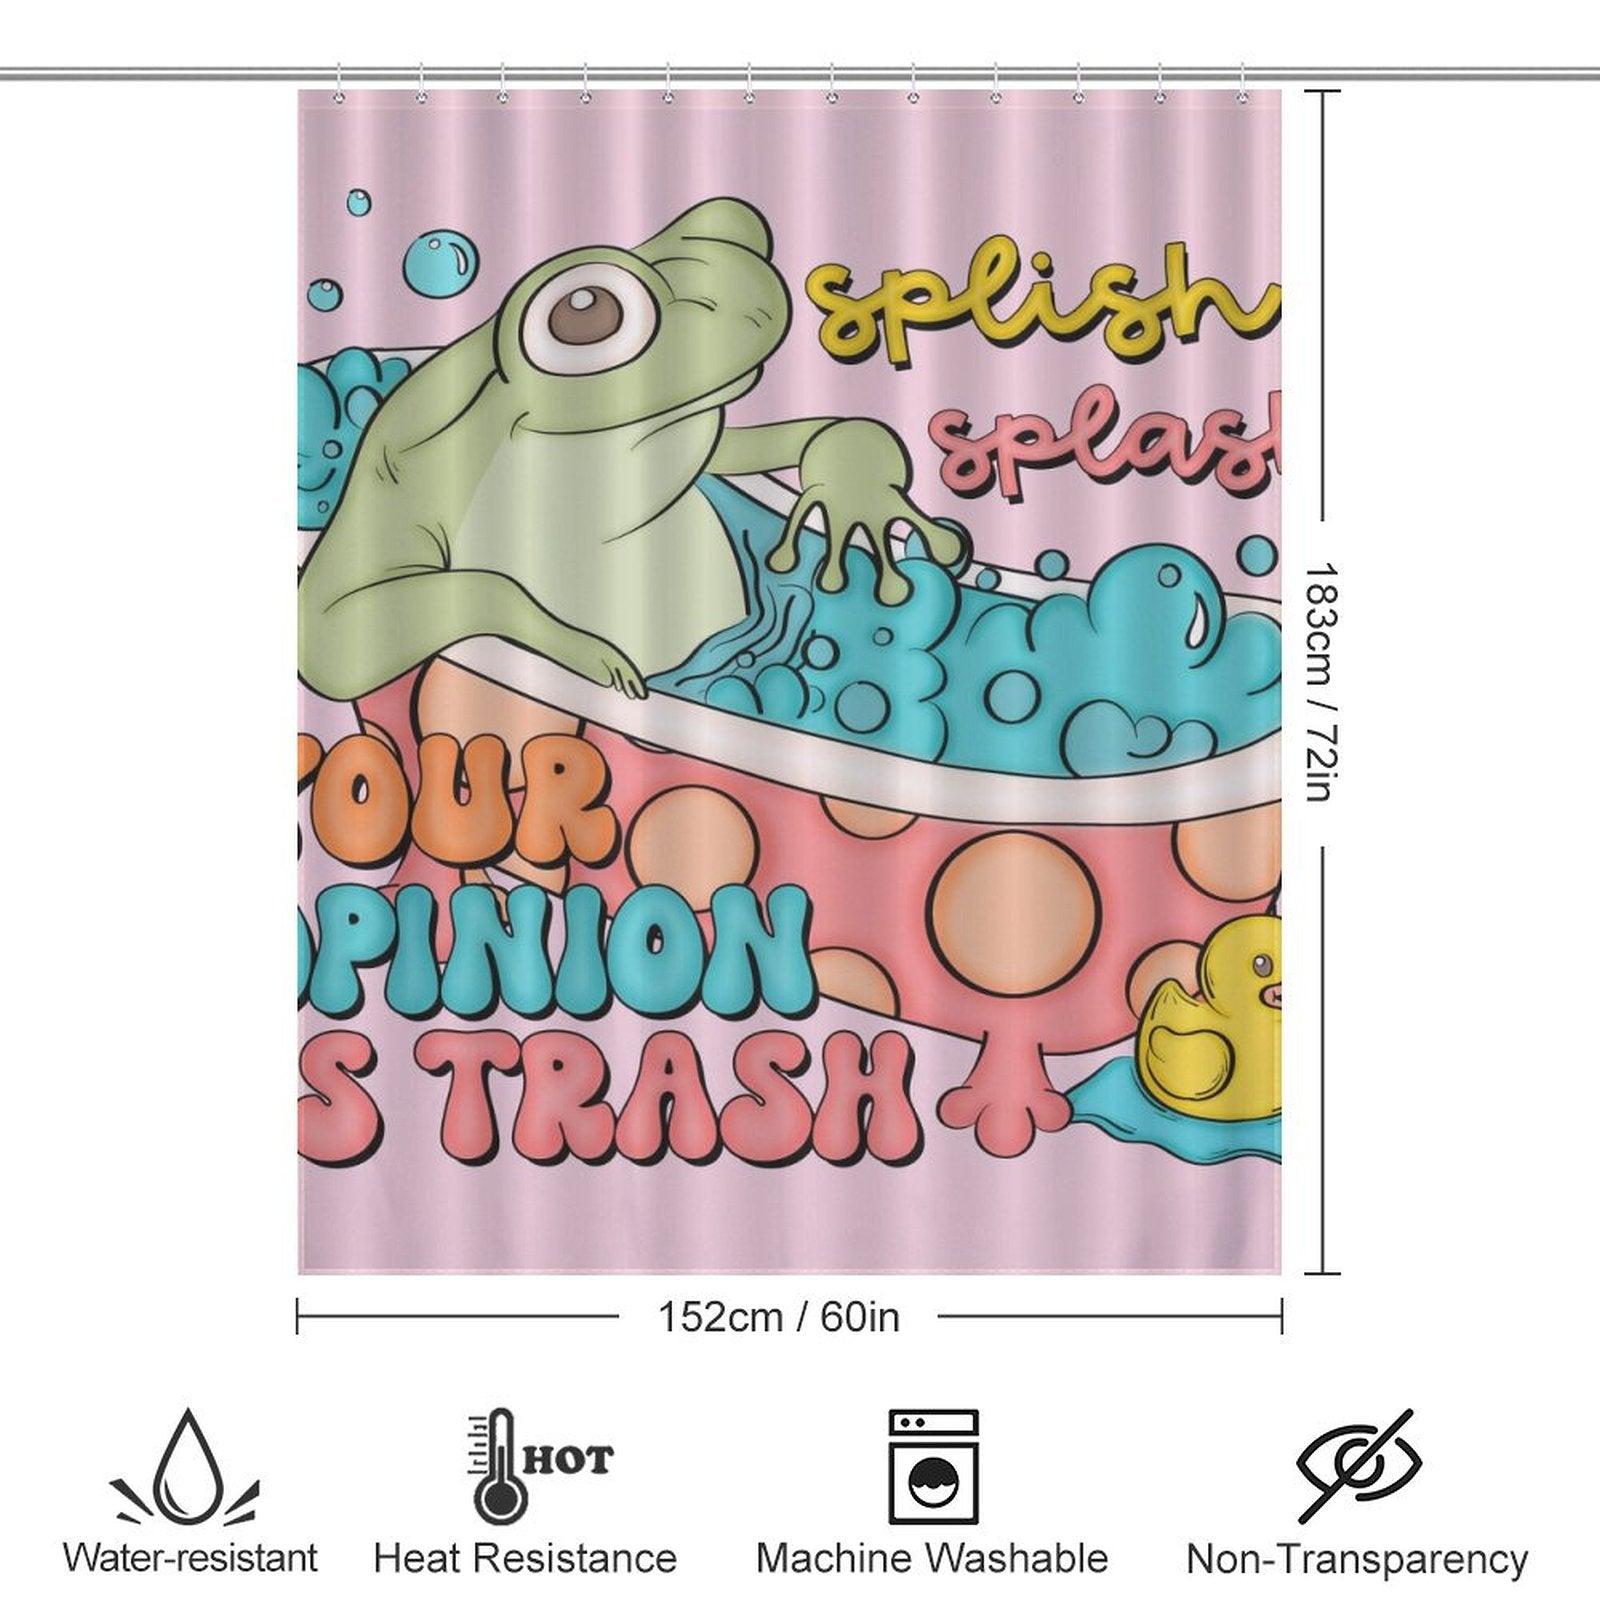 Shower curtain with a cartoon frog and rubber duck in a bathtub. Text reads "Your opinion is trash." This Funny Humor Sarcastic Froggy Shower Curtain-Cottoncat by Cotton Cat features water resistance, heat resistance, machine washability, and non-transparency. Perfect addition for humorous bathroom decor.